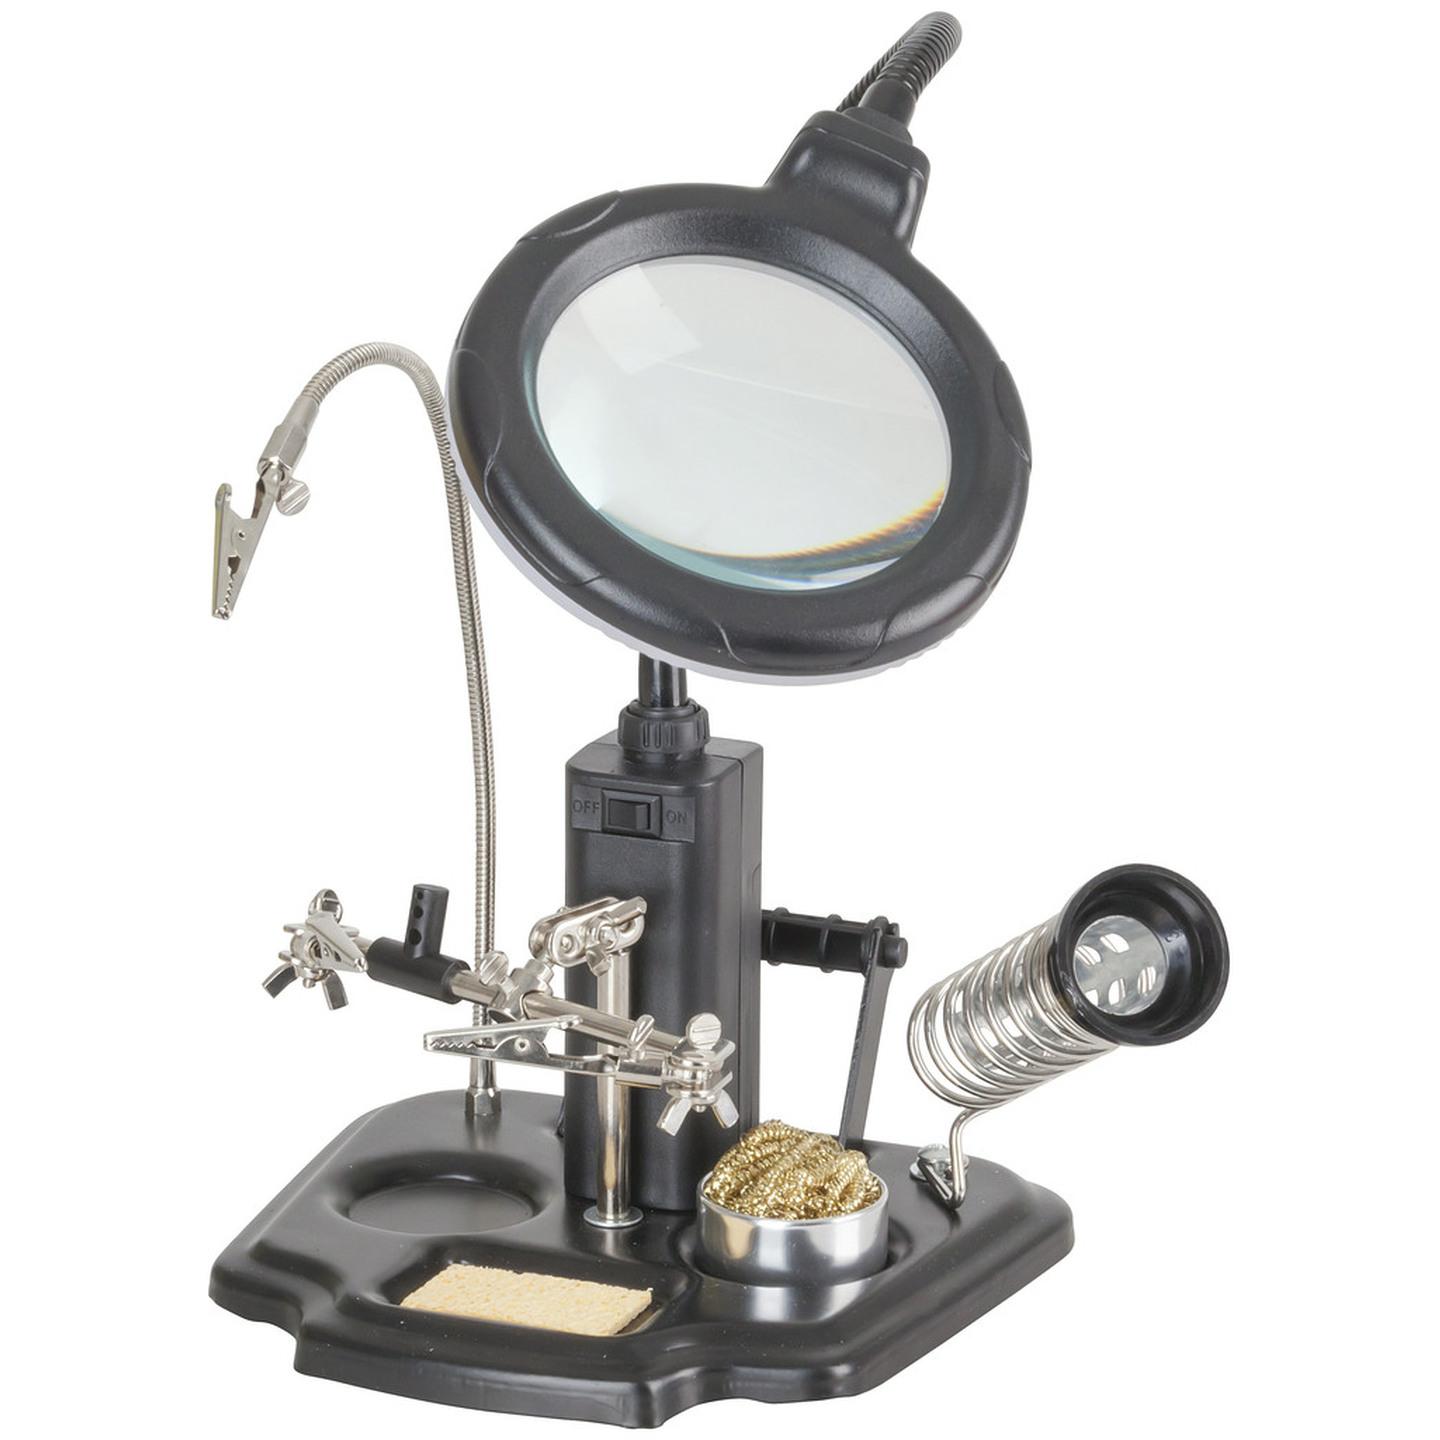 LED Magnifying lamp with third hand